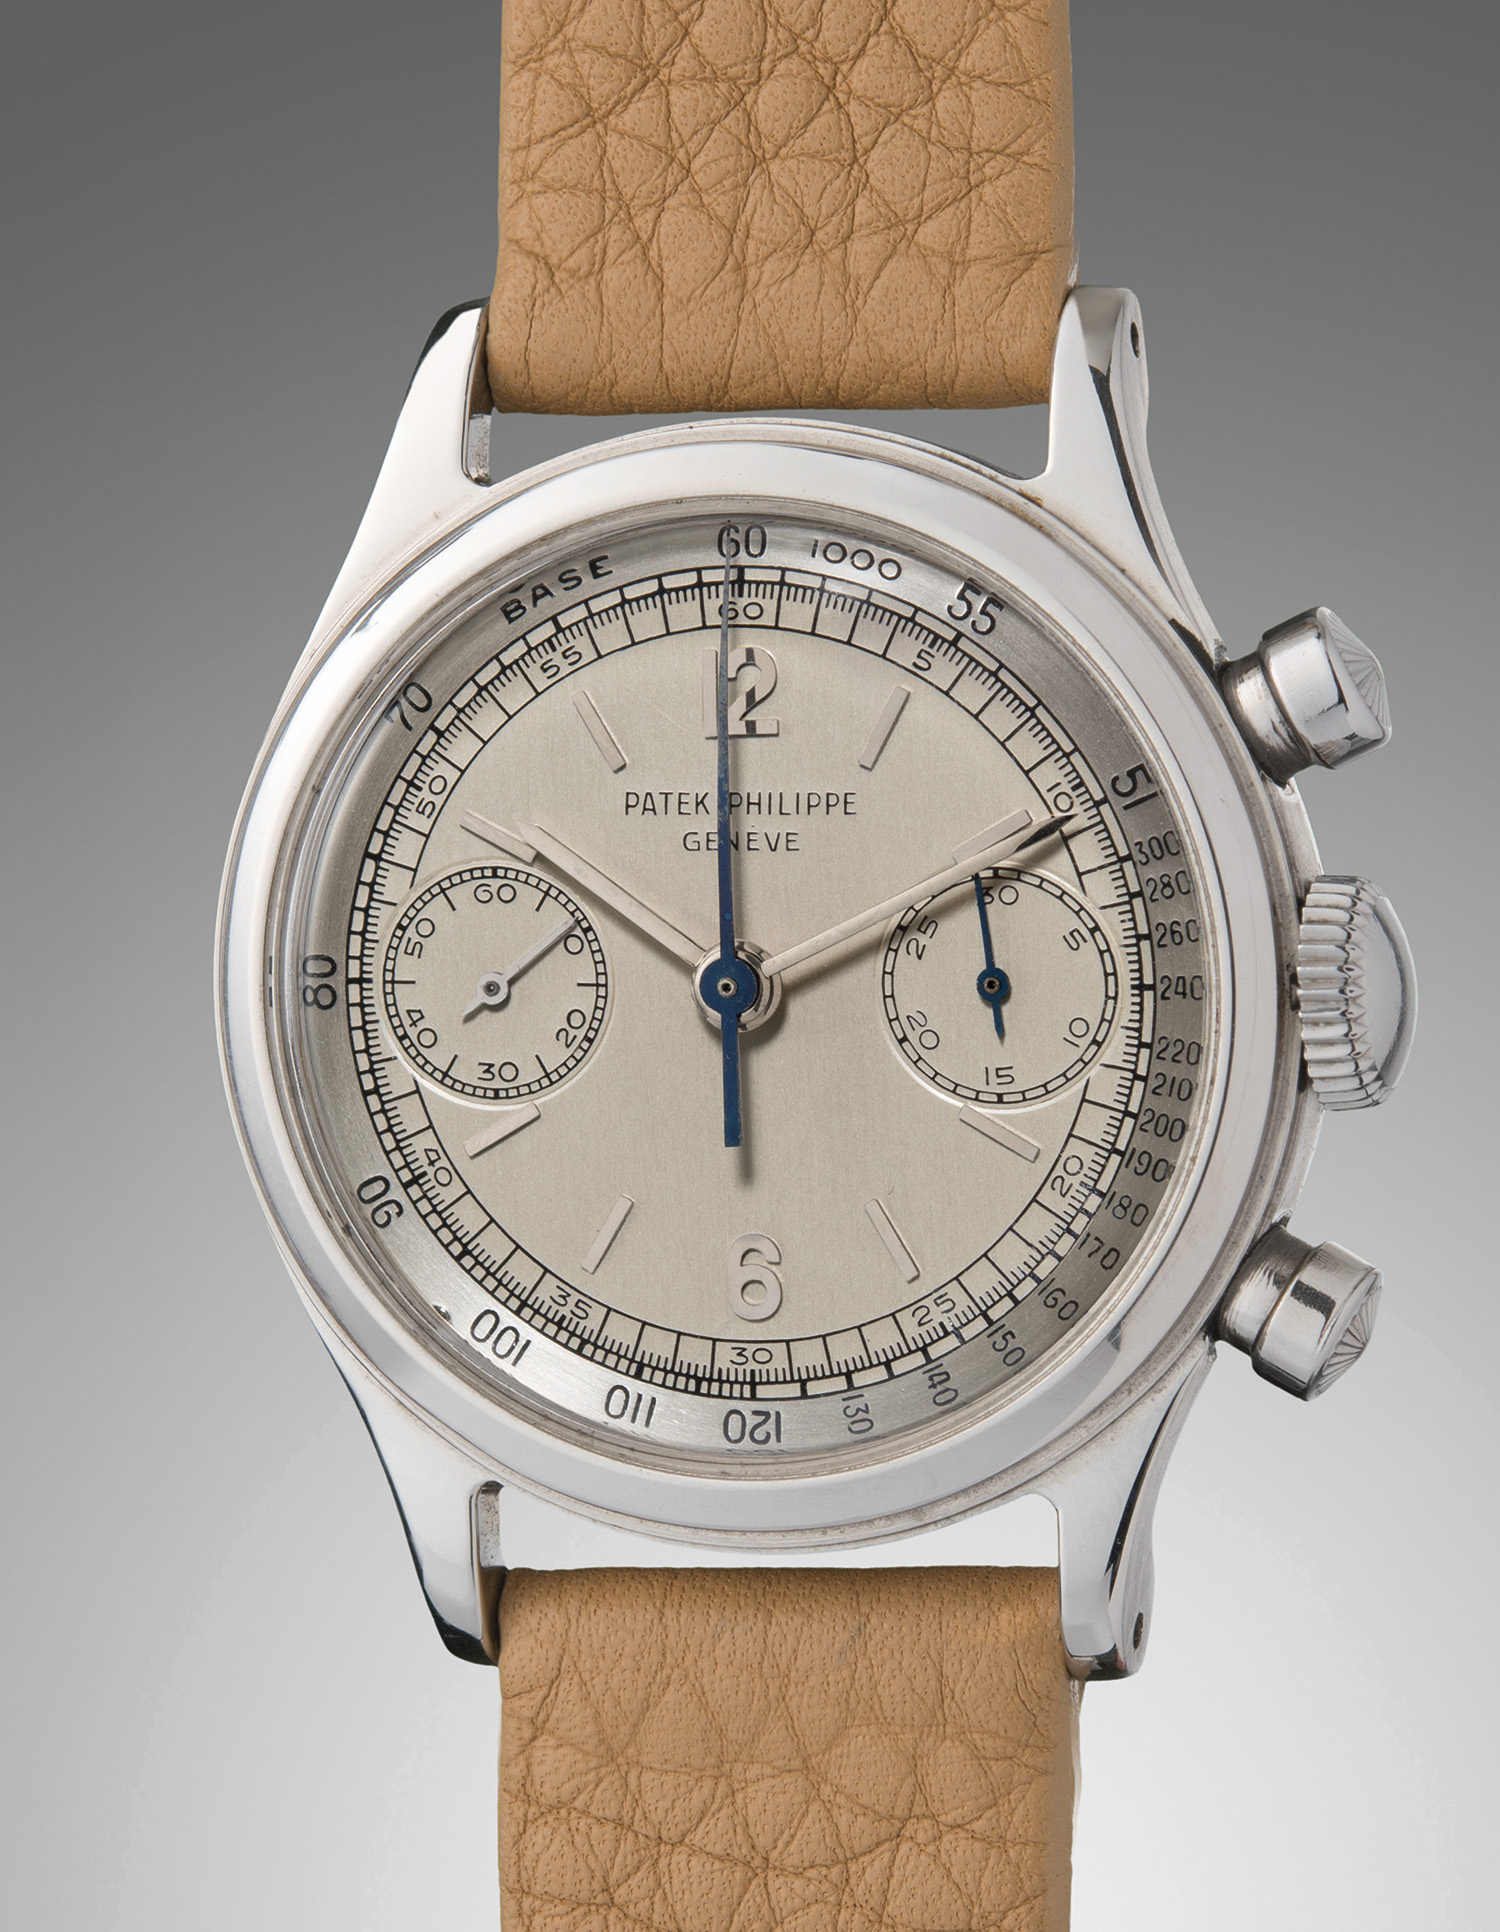 Known as the “Tasti Tondi” the ref. 1463 is one of the most sought-after chronographs thanks to its oversized case, rarity and aesthetic beauty. There were less than 10 per cent which were said to be made in steel. That and the fact that it is one of the eight known pieces with a “two tone” silver dial variation made it very much worth the $495,000.